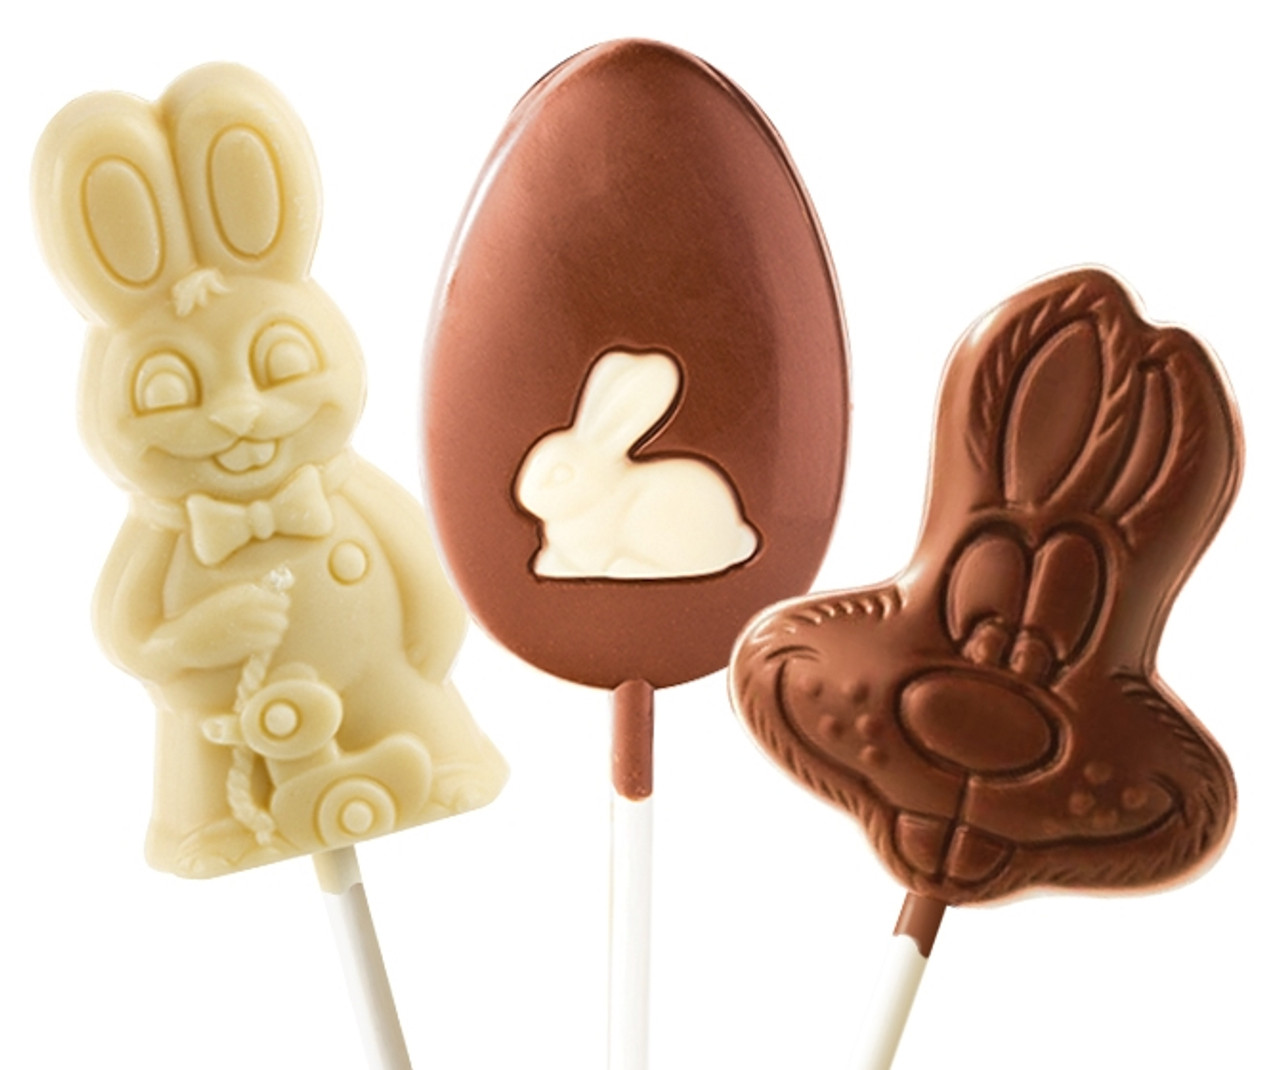 Easter Chocolate Lollipop Collection. Photo of 3 different styles of chocolate Easter lollipops.